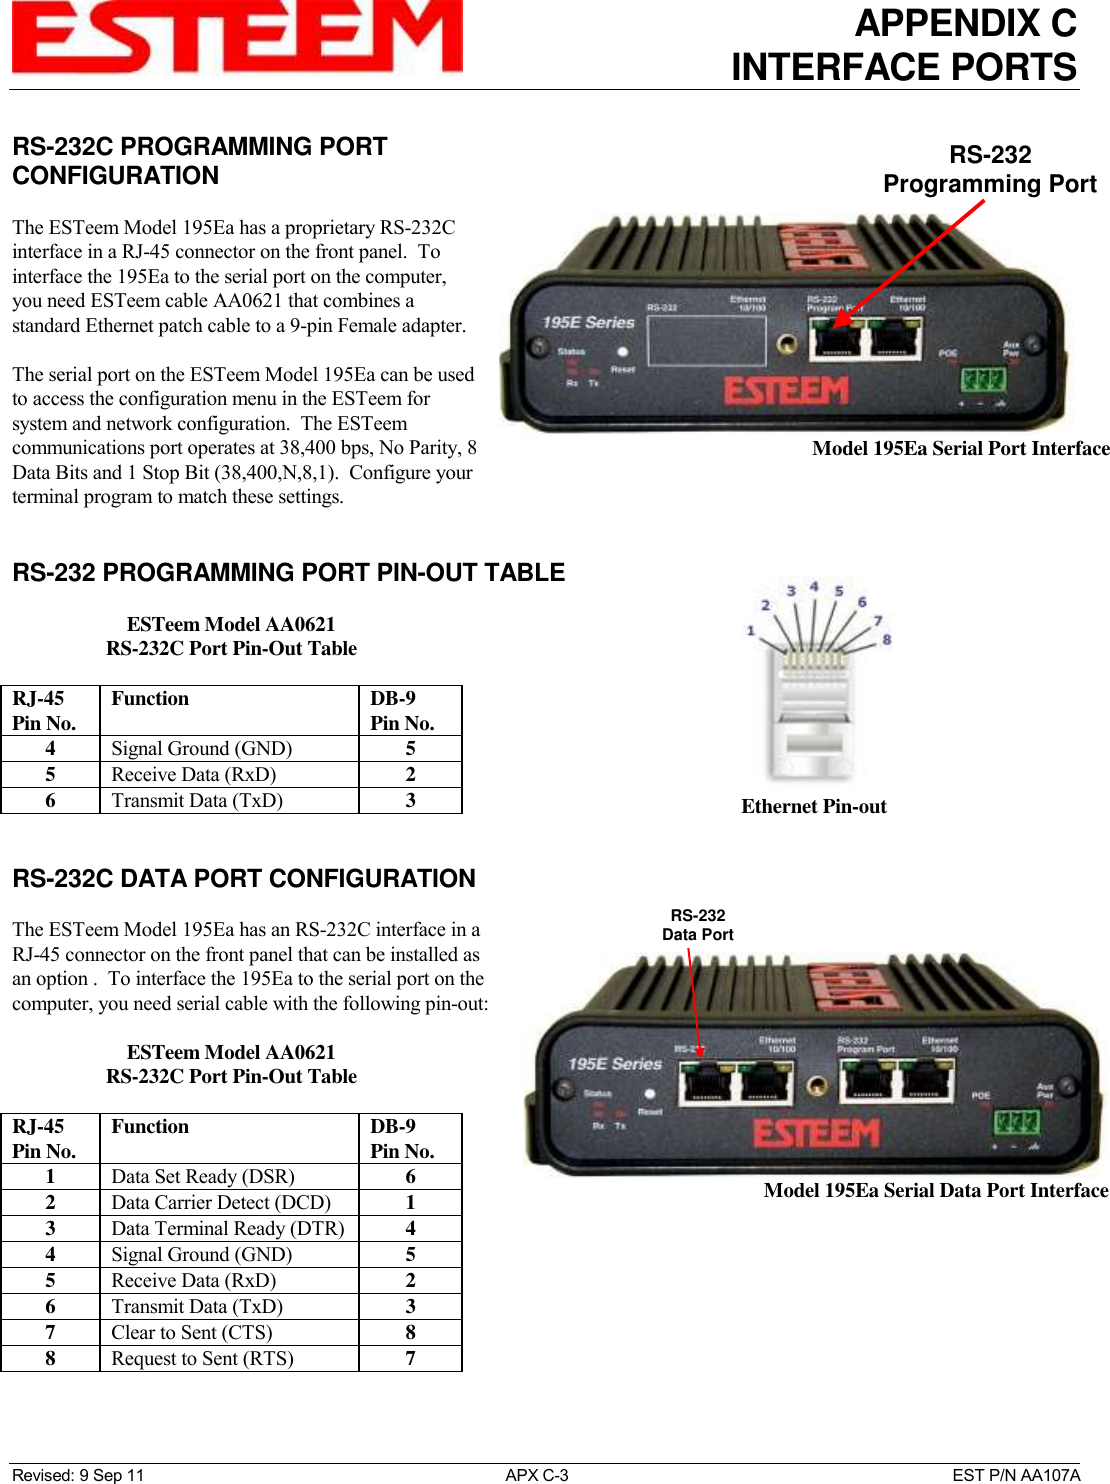 APPENDIX C INTERFACE PORTS   Revised: 9 Sep 11  APX C-3  EST P/N AA107A RS-232C PROGRAMMING PORT CONFIGURATION  The ESTeem Model 195Ea has a proprietary RS-232C interface in a RJ-45 connector on the front panel.  To interface the 195Ea to the serial port on the computer, you need ESTeem cable AA0621 that combines a standard Ethernet patch cable to a 9-pin Female adapter.  The serial port on the ESTeem Model 195Ea can be used to access the configuration menu in the ESTeem for system and network configuration.  The ESTeem communications port operates at 38,400 bps, No Parity, 8 Data Bits and 1 Stop Bit (38,400,N,8,1).  Configure your terminal program to match these settings.   RS-232 PROGRAMMING PORT PIN-OUT TABLE  ESTeem Model AA0621 RS-232C Port Pin-Out Table  RJ-45 Pin No. Function  DB-9 Pin No. 4 Signal Ground (GND) 5 5 Receive Data (RxD) 2 6 Transmit Data (TxD) 3   RS-232C DATA PORT CONFIGURATION  The ESTeem Model 195Ea has an RS-232C interface in a RJ-45 connector on the front panel that can be installed as an option .  To interface the 195Ea to the serial port on the computer, you need serial cable with the following pin-out:  ESTeem Model AA0621 RS-232C Port Pin-Out Table  RJ-45 Pin No. Function  DB-9 Pin No. 1 Data Set Ready (DSR) 6 2 Data Carrier Detect (DCD) 1 3 Data Terminal Ready (DTR) 4 4 Signal Ground (GND) 5 5 Receive Data (RxD) 2 6 Transmit Data (TxD) 3 7 Clear to Sent (CTS) 8 8 Request to Sent (RTS) 7  RS-232Programming Port Model 195Ea Serial Port Interface  Ethernet Pin-out RS-232Data Port Model 195Ea Serial Data Port Interface 